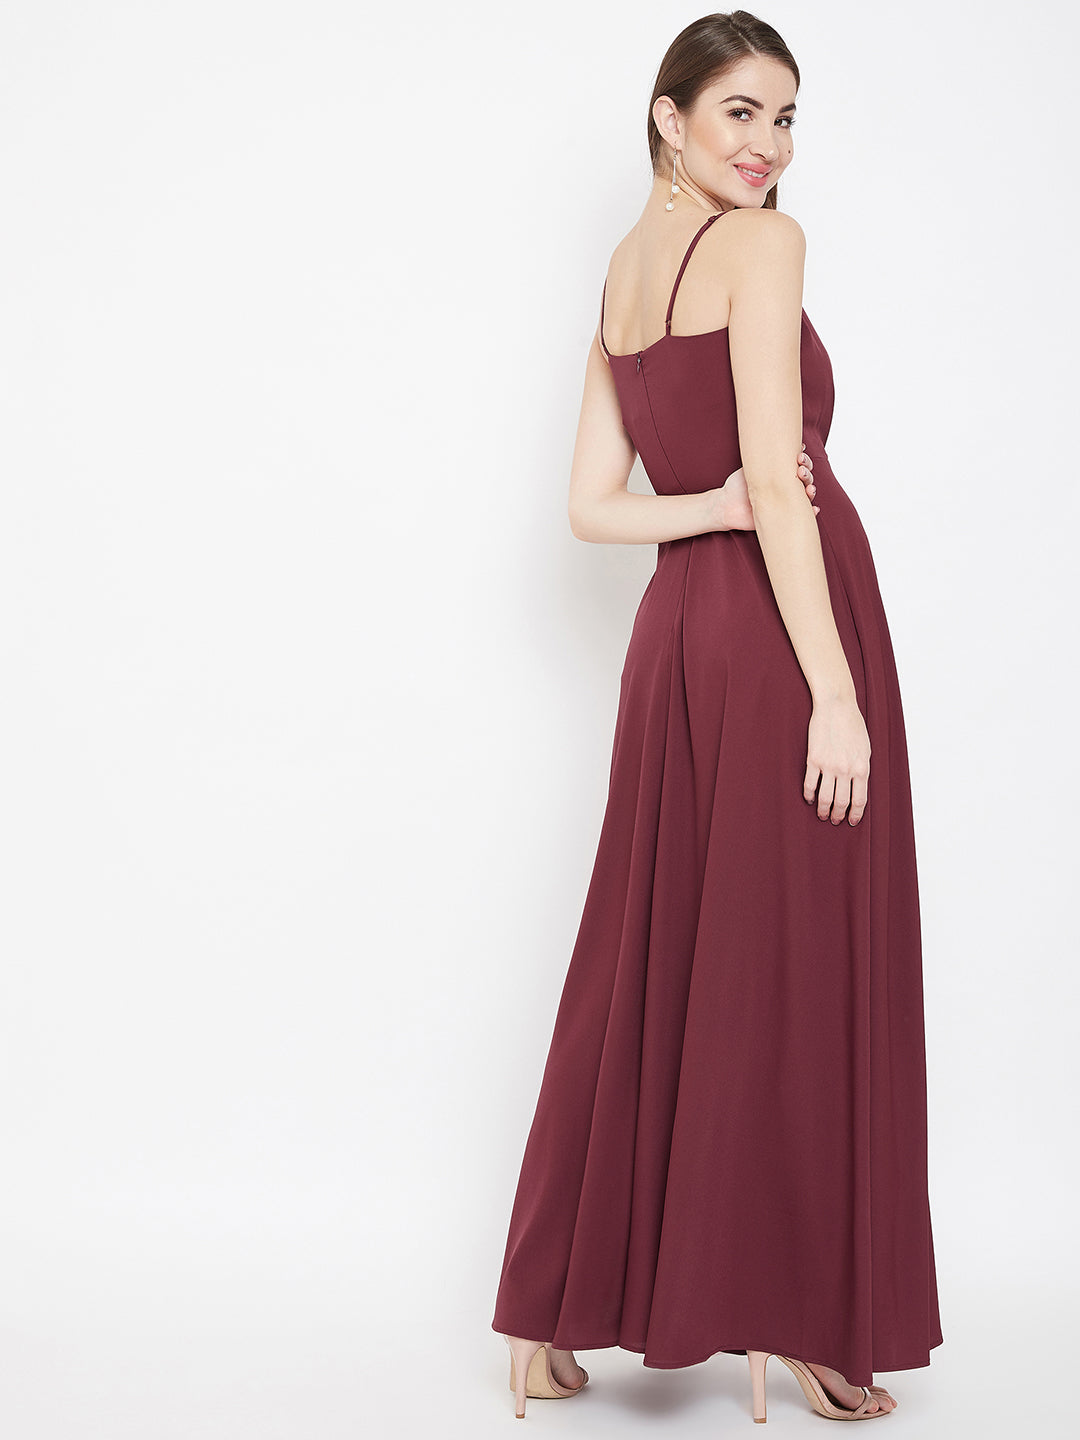 Buy Faballey Maroon Puff Sleeve Dress with Embellished Belt (Set of 2)  online